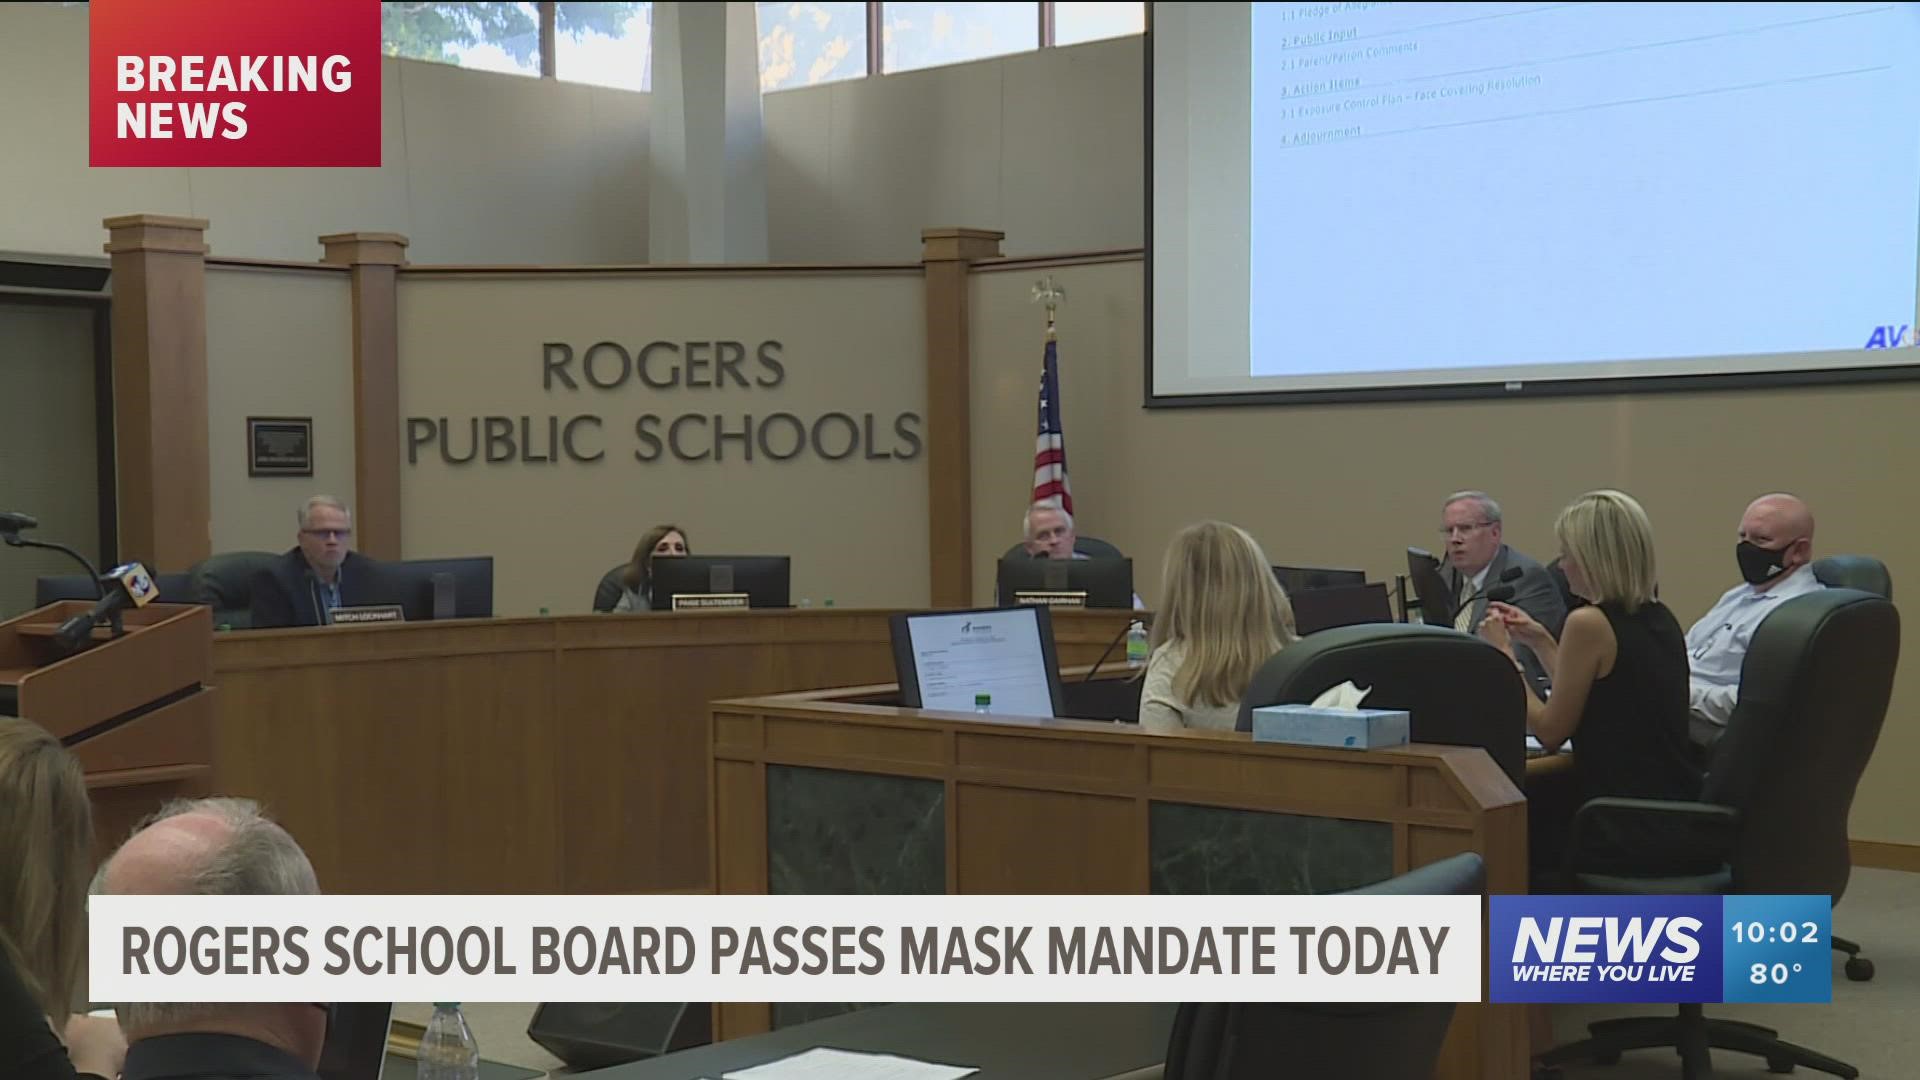 The school board met Thursday, August 11 to discuss mask requirements within schools as COVID-19 numbers rise.